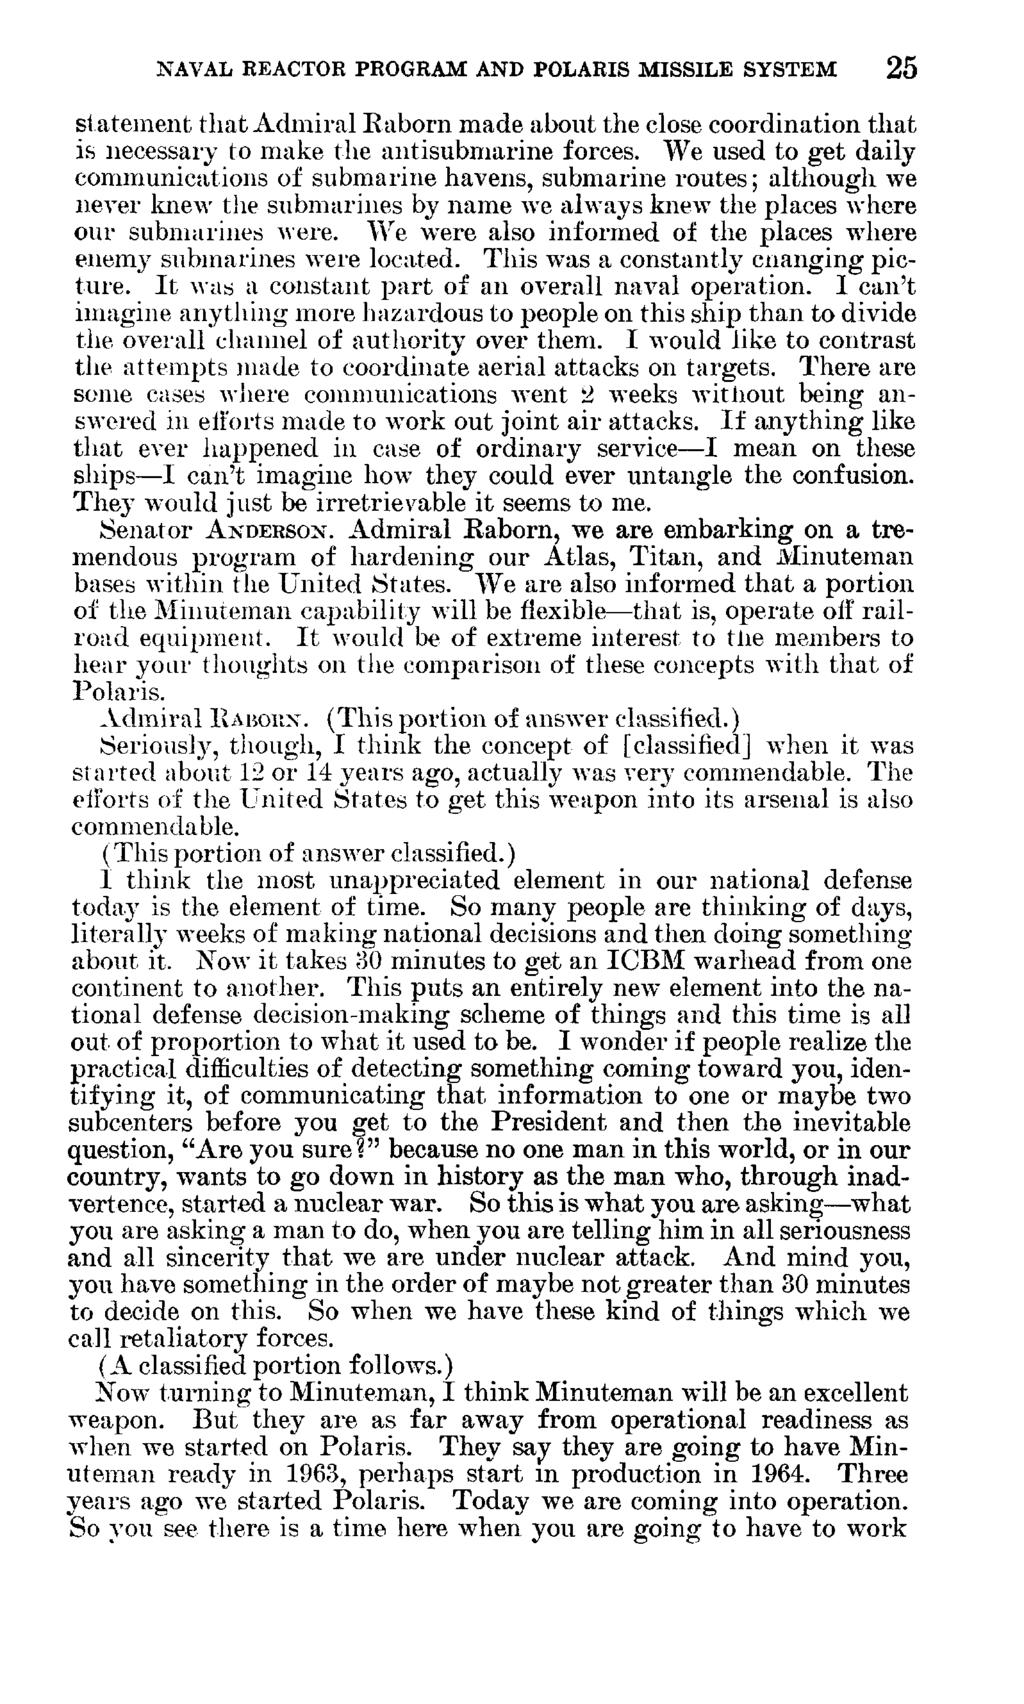 NAVAL REACTOE PROGRAM AND POLARIS MISSILE SYSTEM 25 statement that Admiral Kaborn made about the close coordination that is necessary to make the antisubmarine forces.